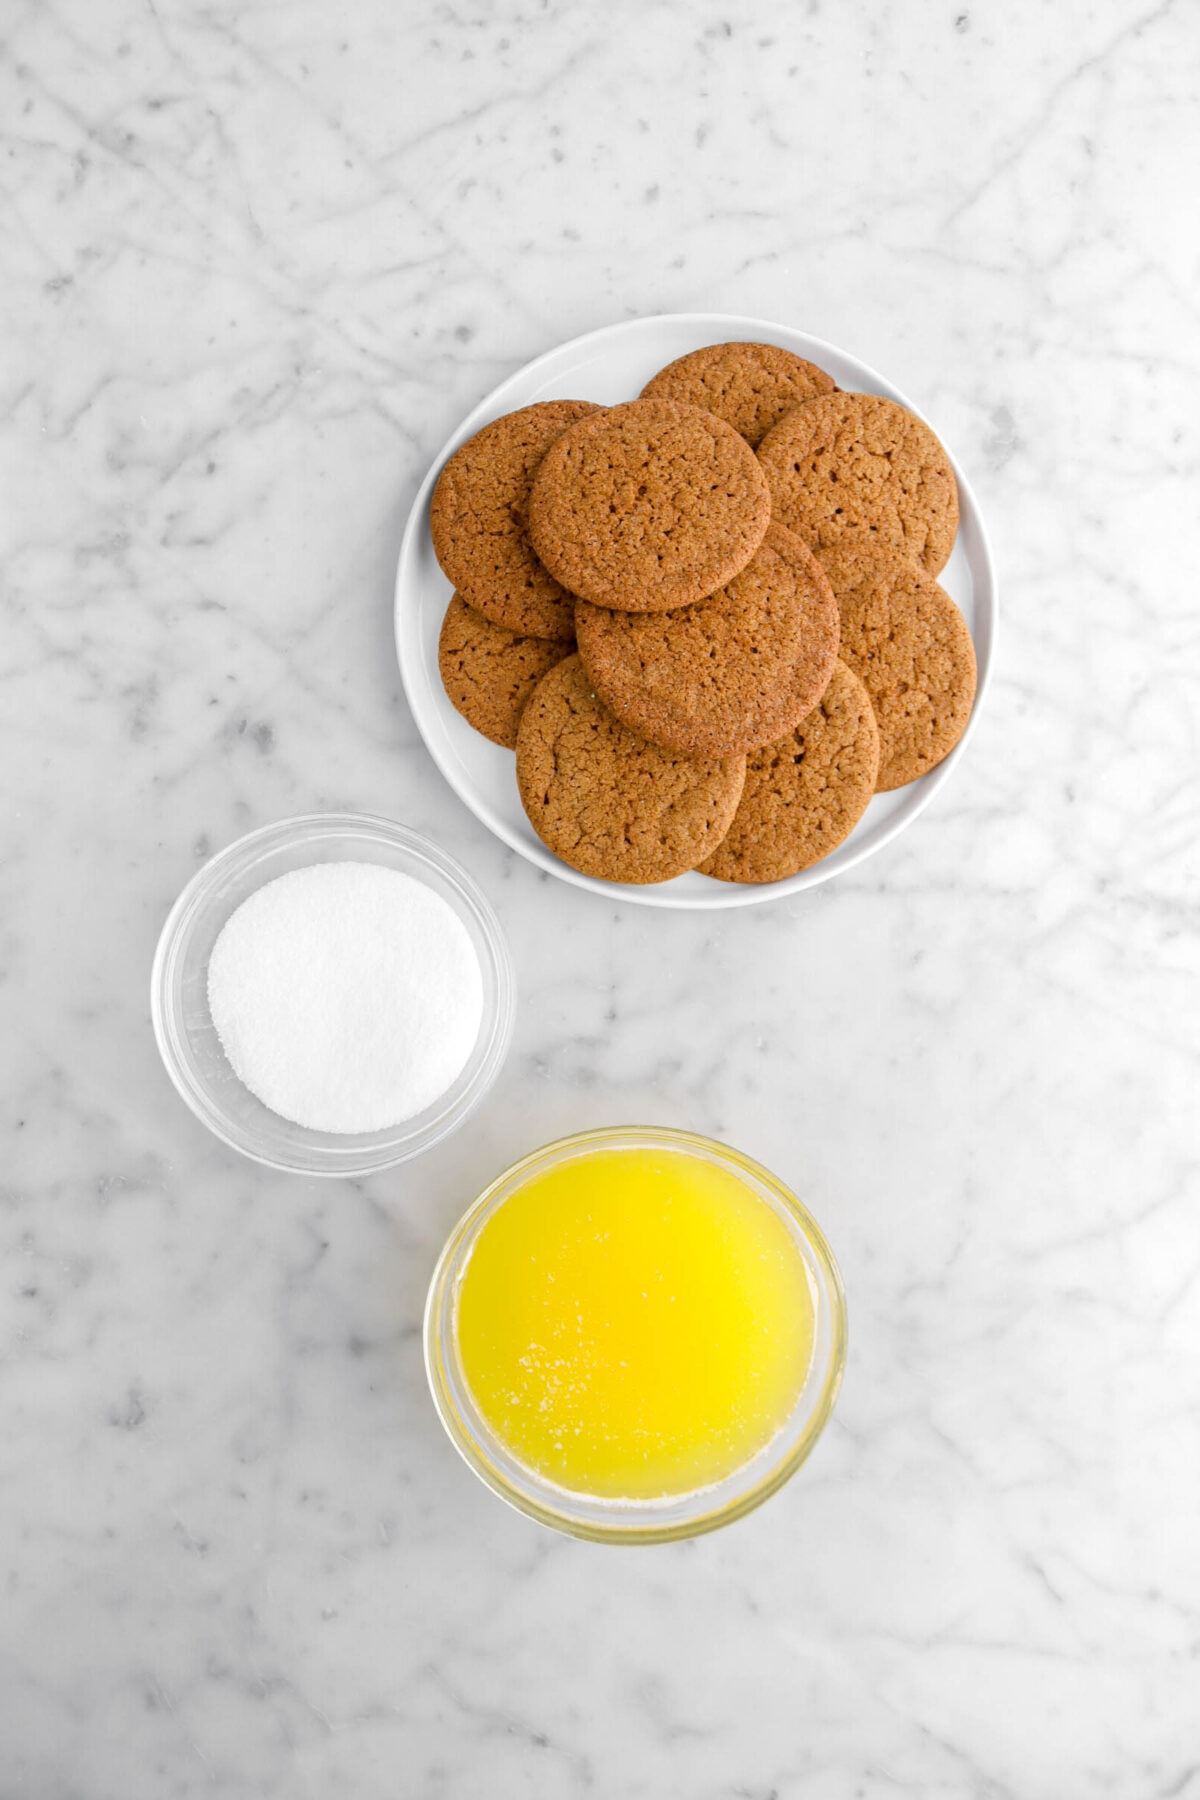 gingersnap cookies, sugar, and melted butter on marble surface.